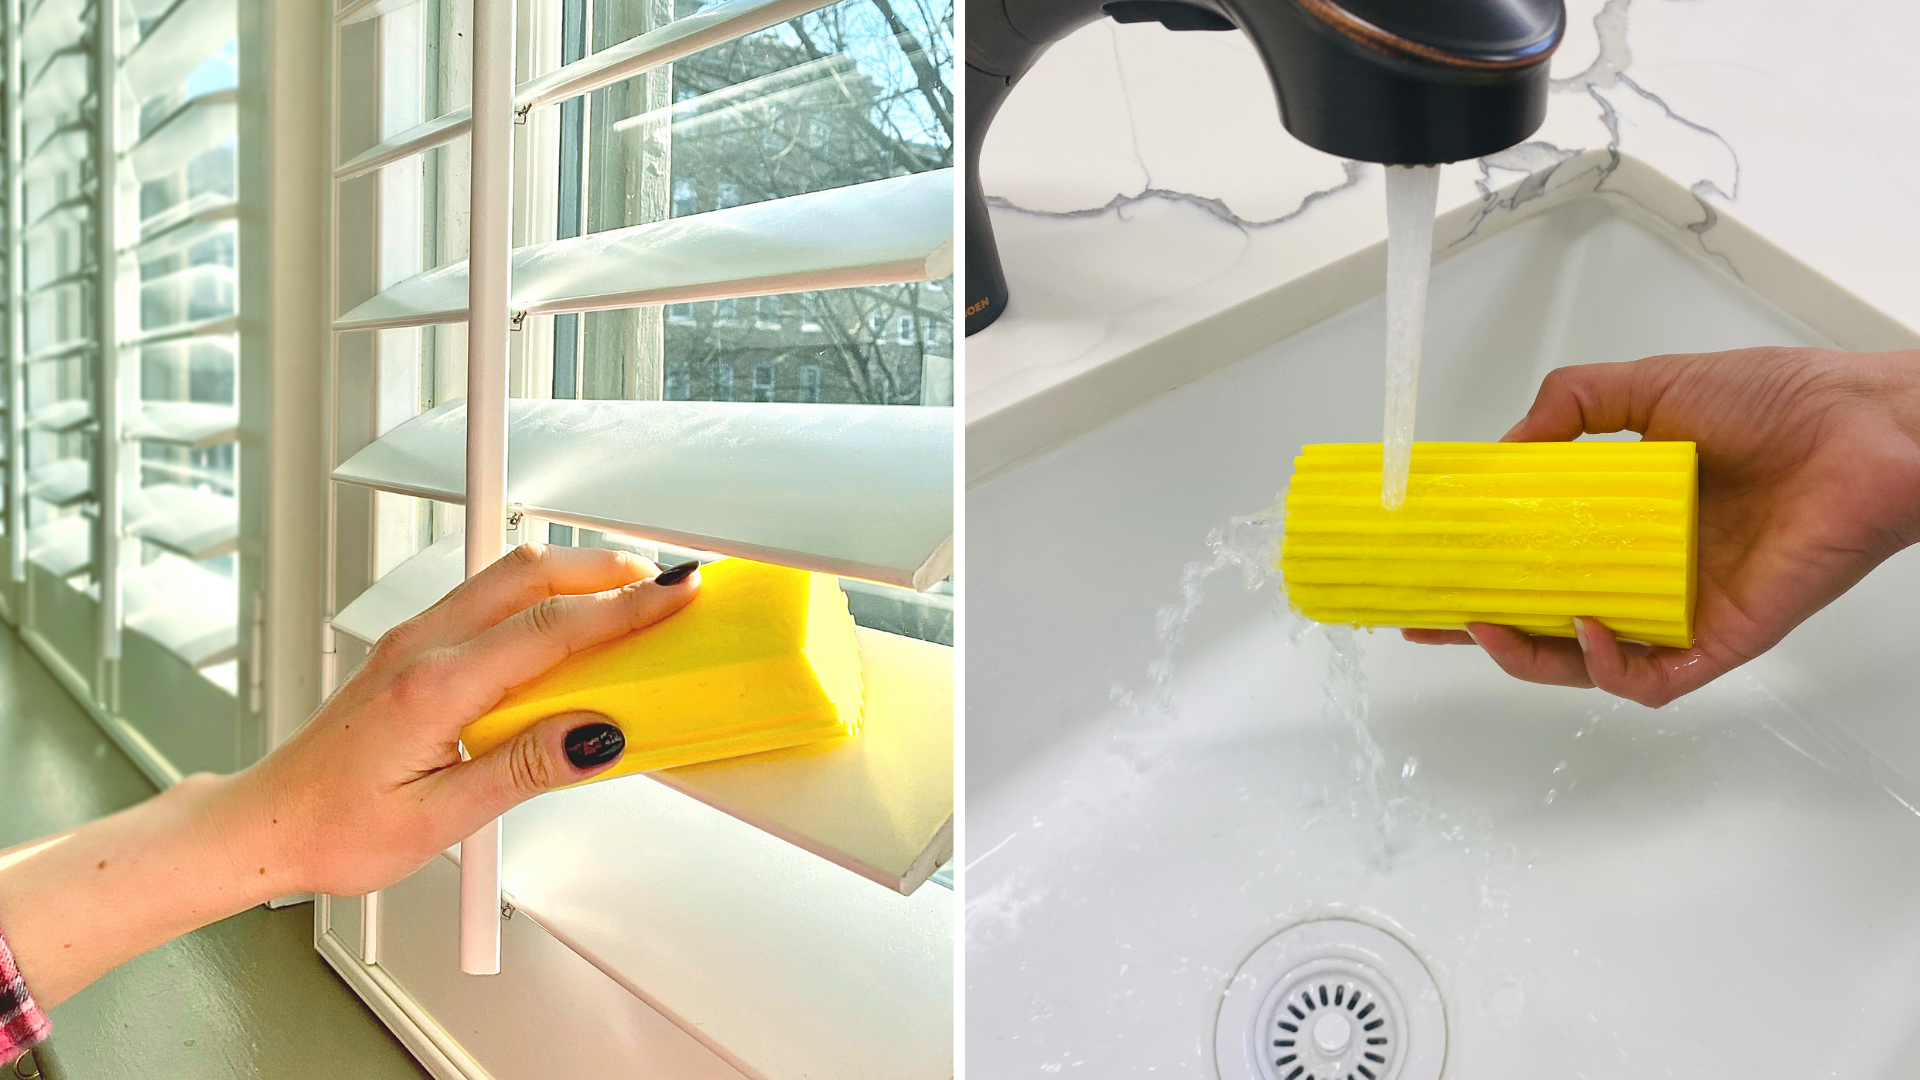 Does The Scrub Daddy Damp Duster Live Up to The Hype? – CleanHQ